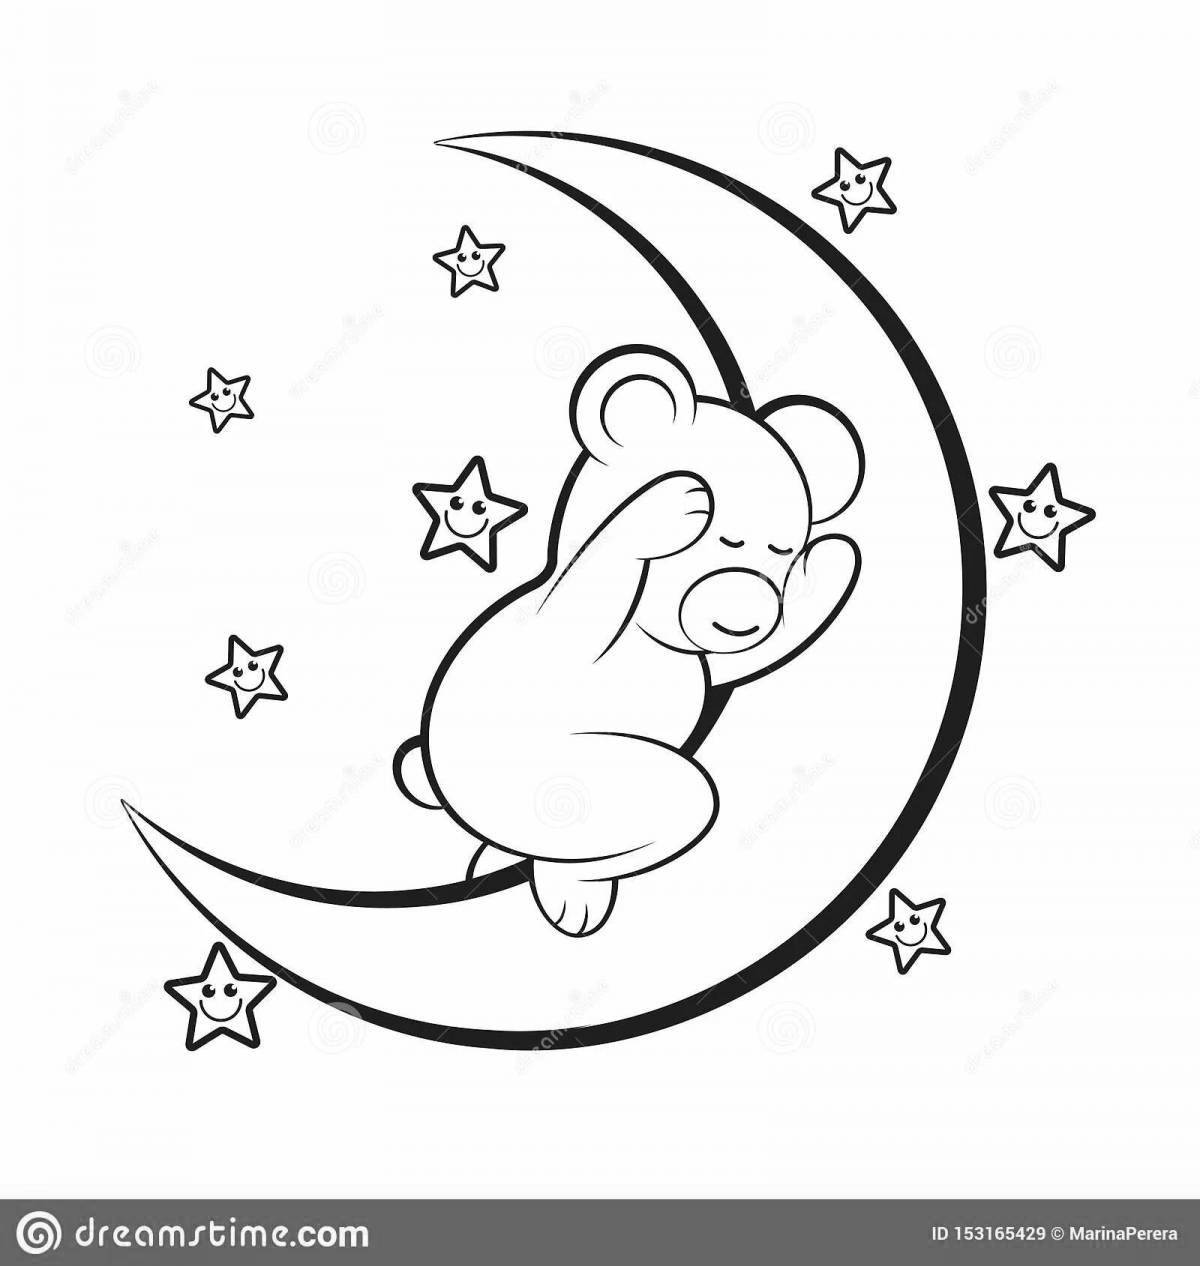 Coloring book sparkling bear on the moon